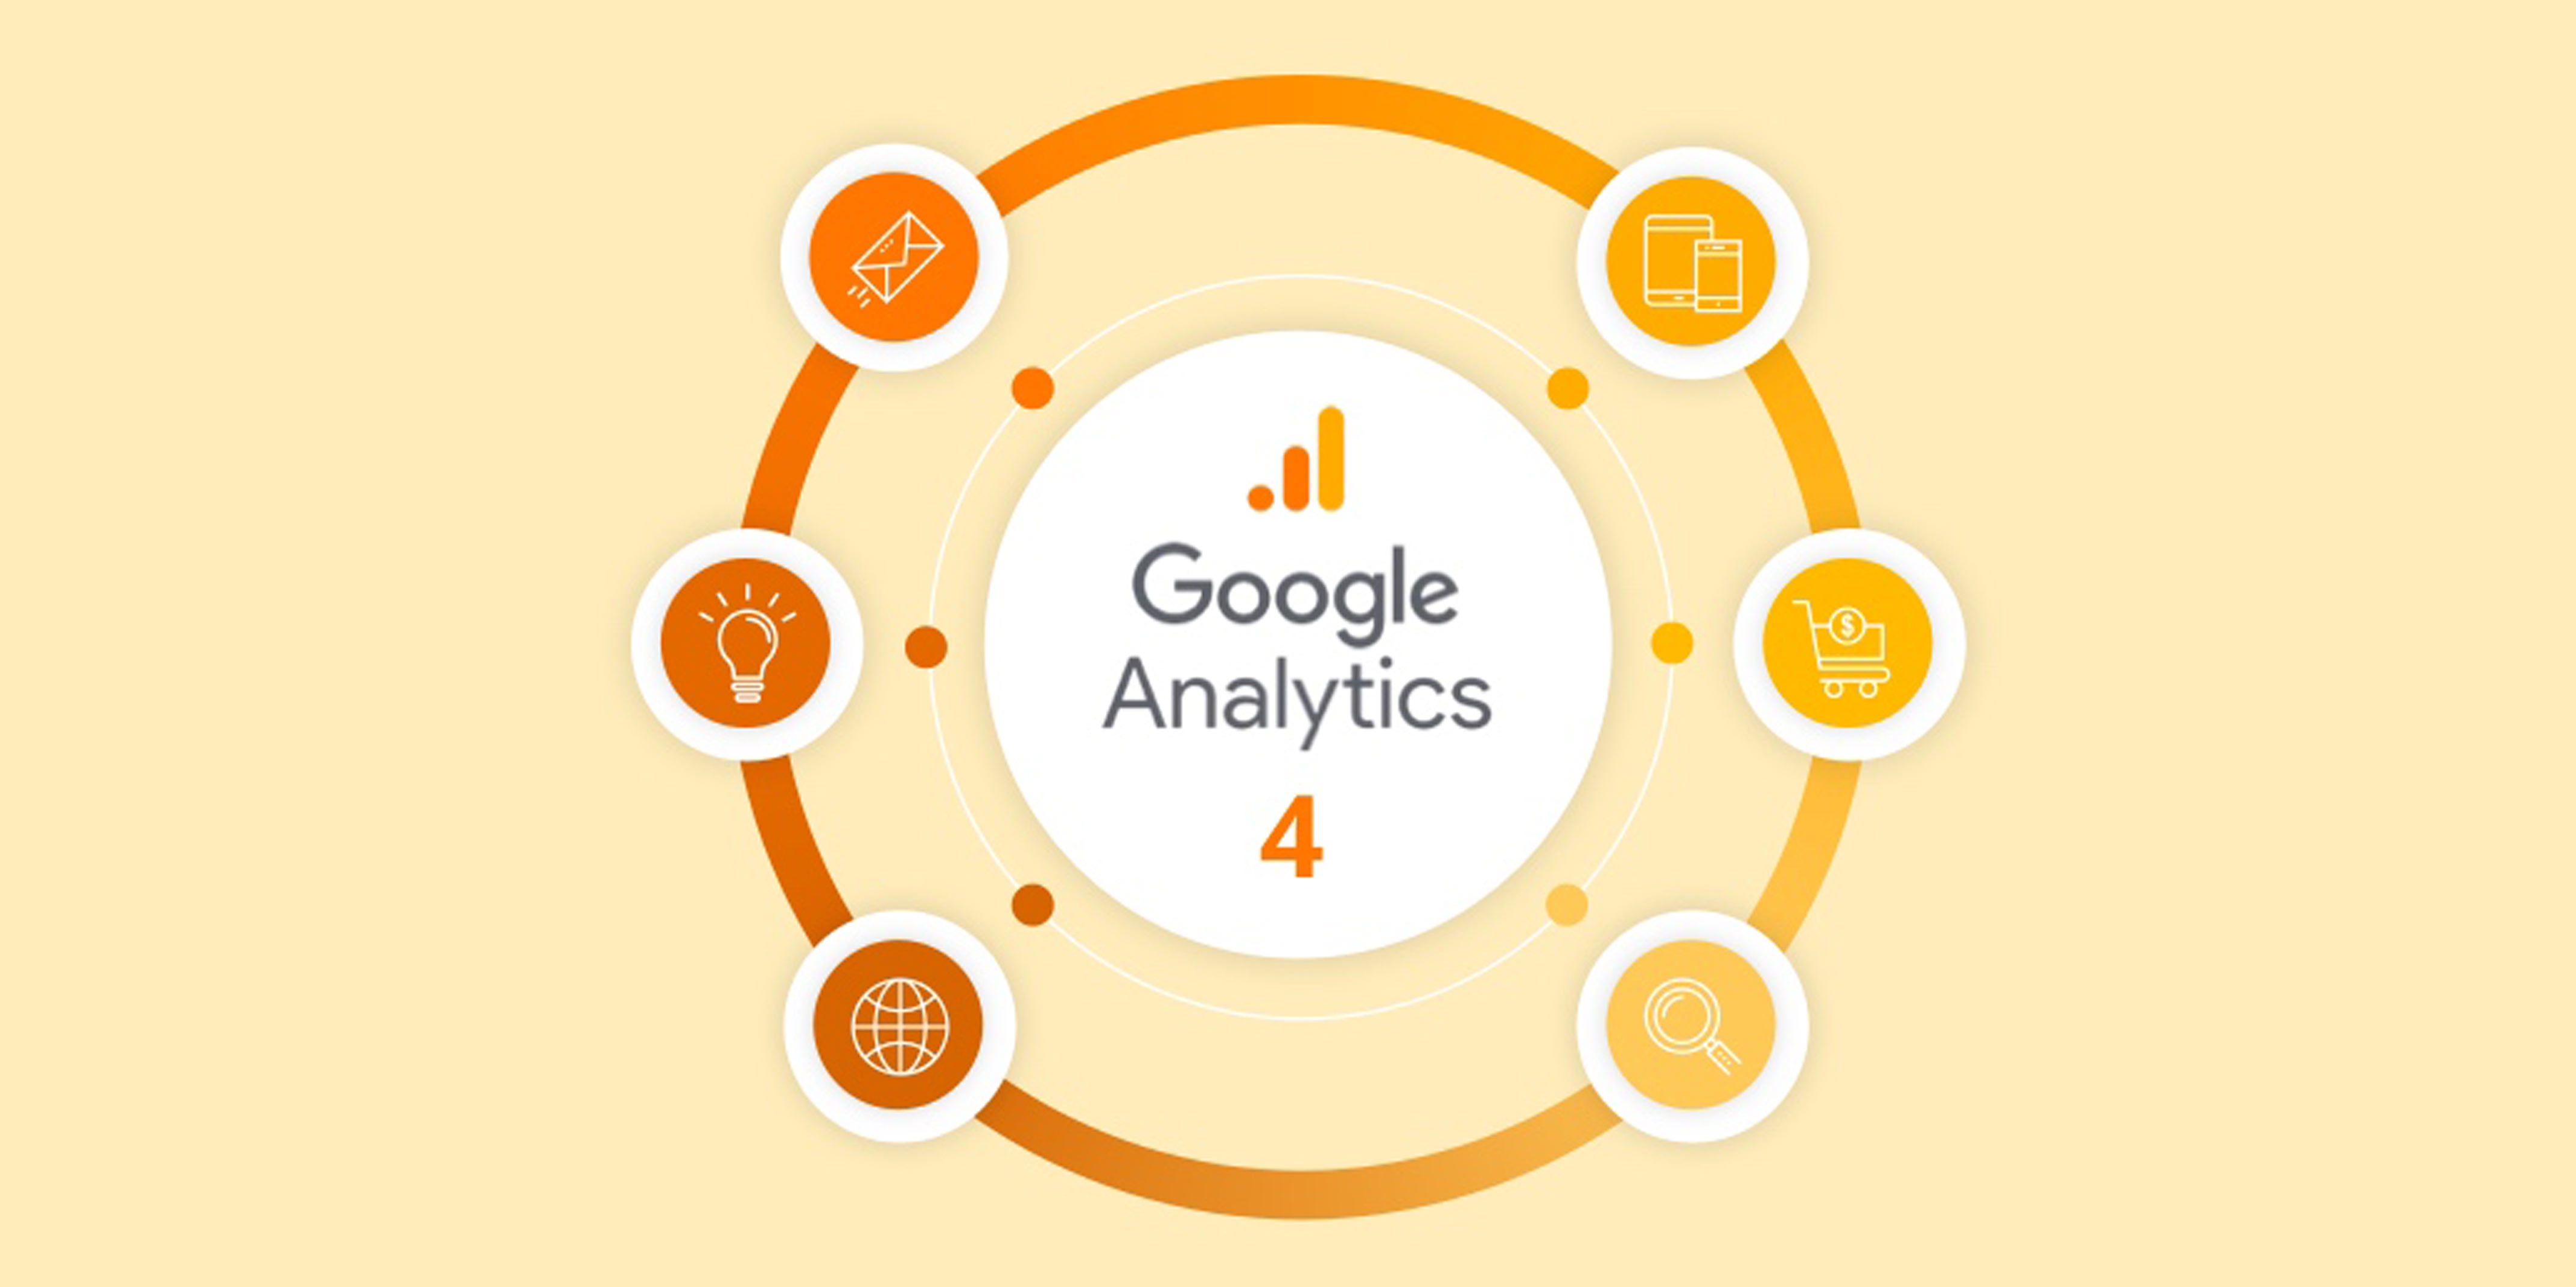 A guide to google analytics 4: what’s new & important for GA4